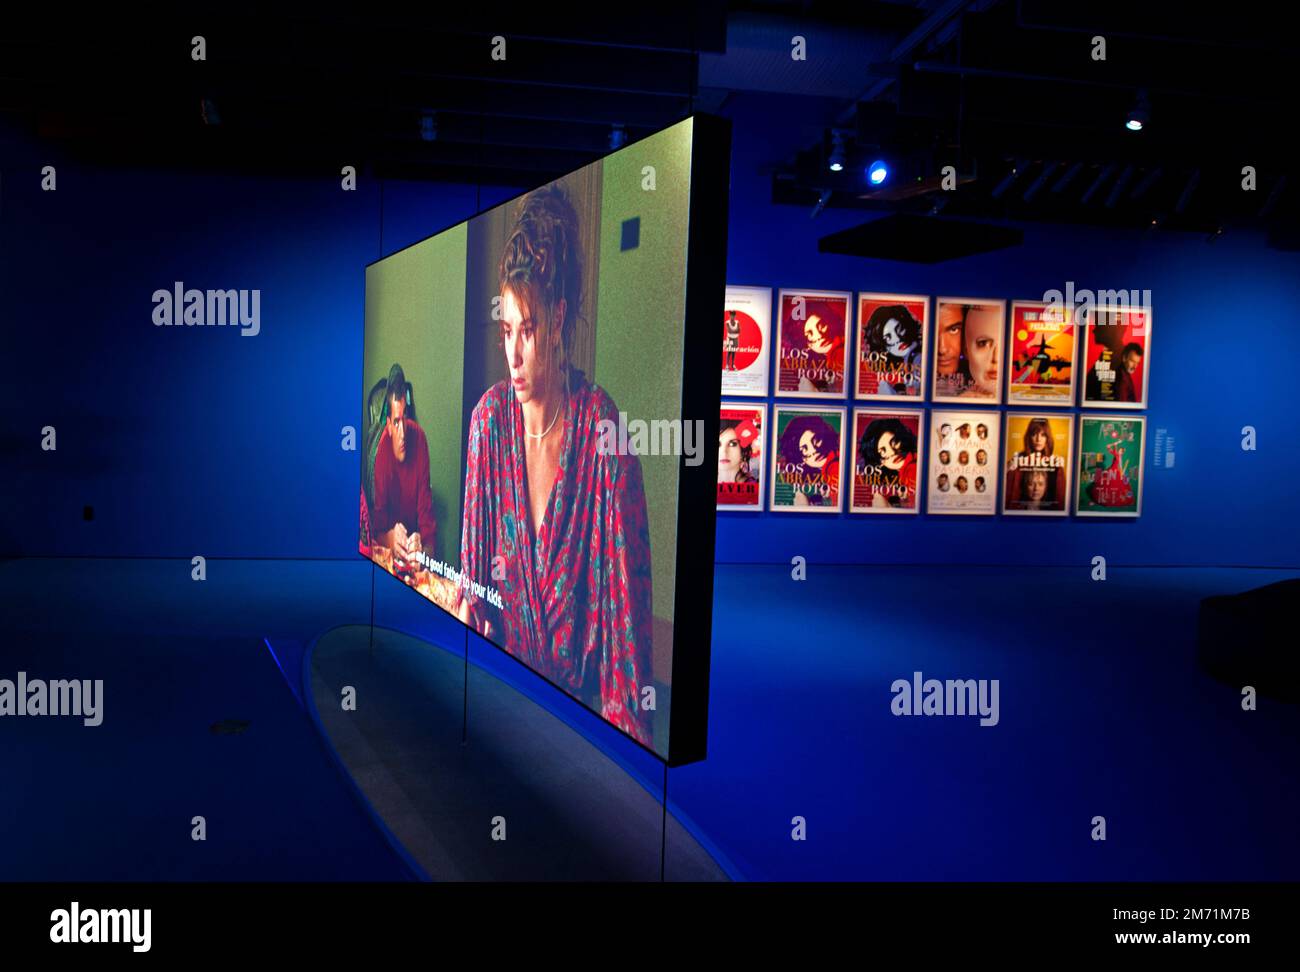 Pedro Almodovar exhibition at the Academy Musuem in Los Angeles, CA. Stock Photo